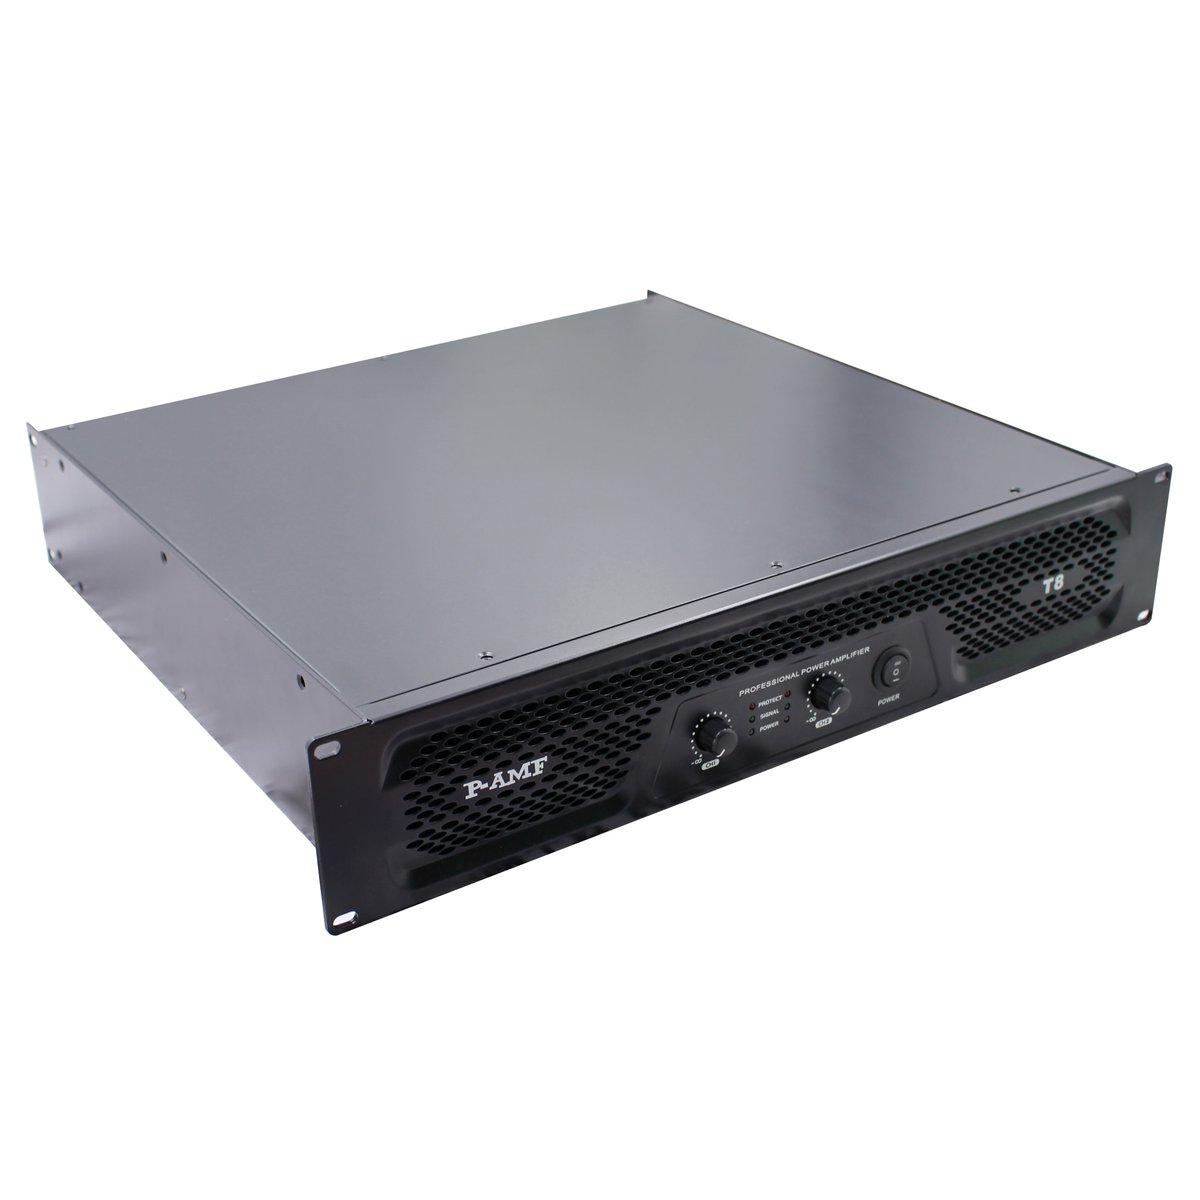 Foshan Shu bole Electronic Technology Co., Ltd fulfills any orders efficiently! We have an advanced process to speed up production. #hfpoweramplifier #professionalpoweramplifiertseries #hifiamp